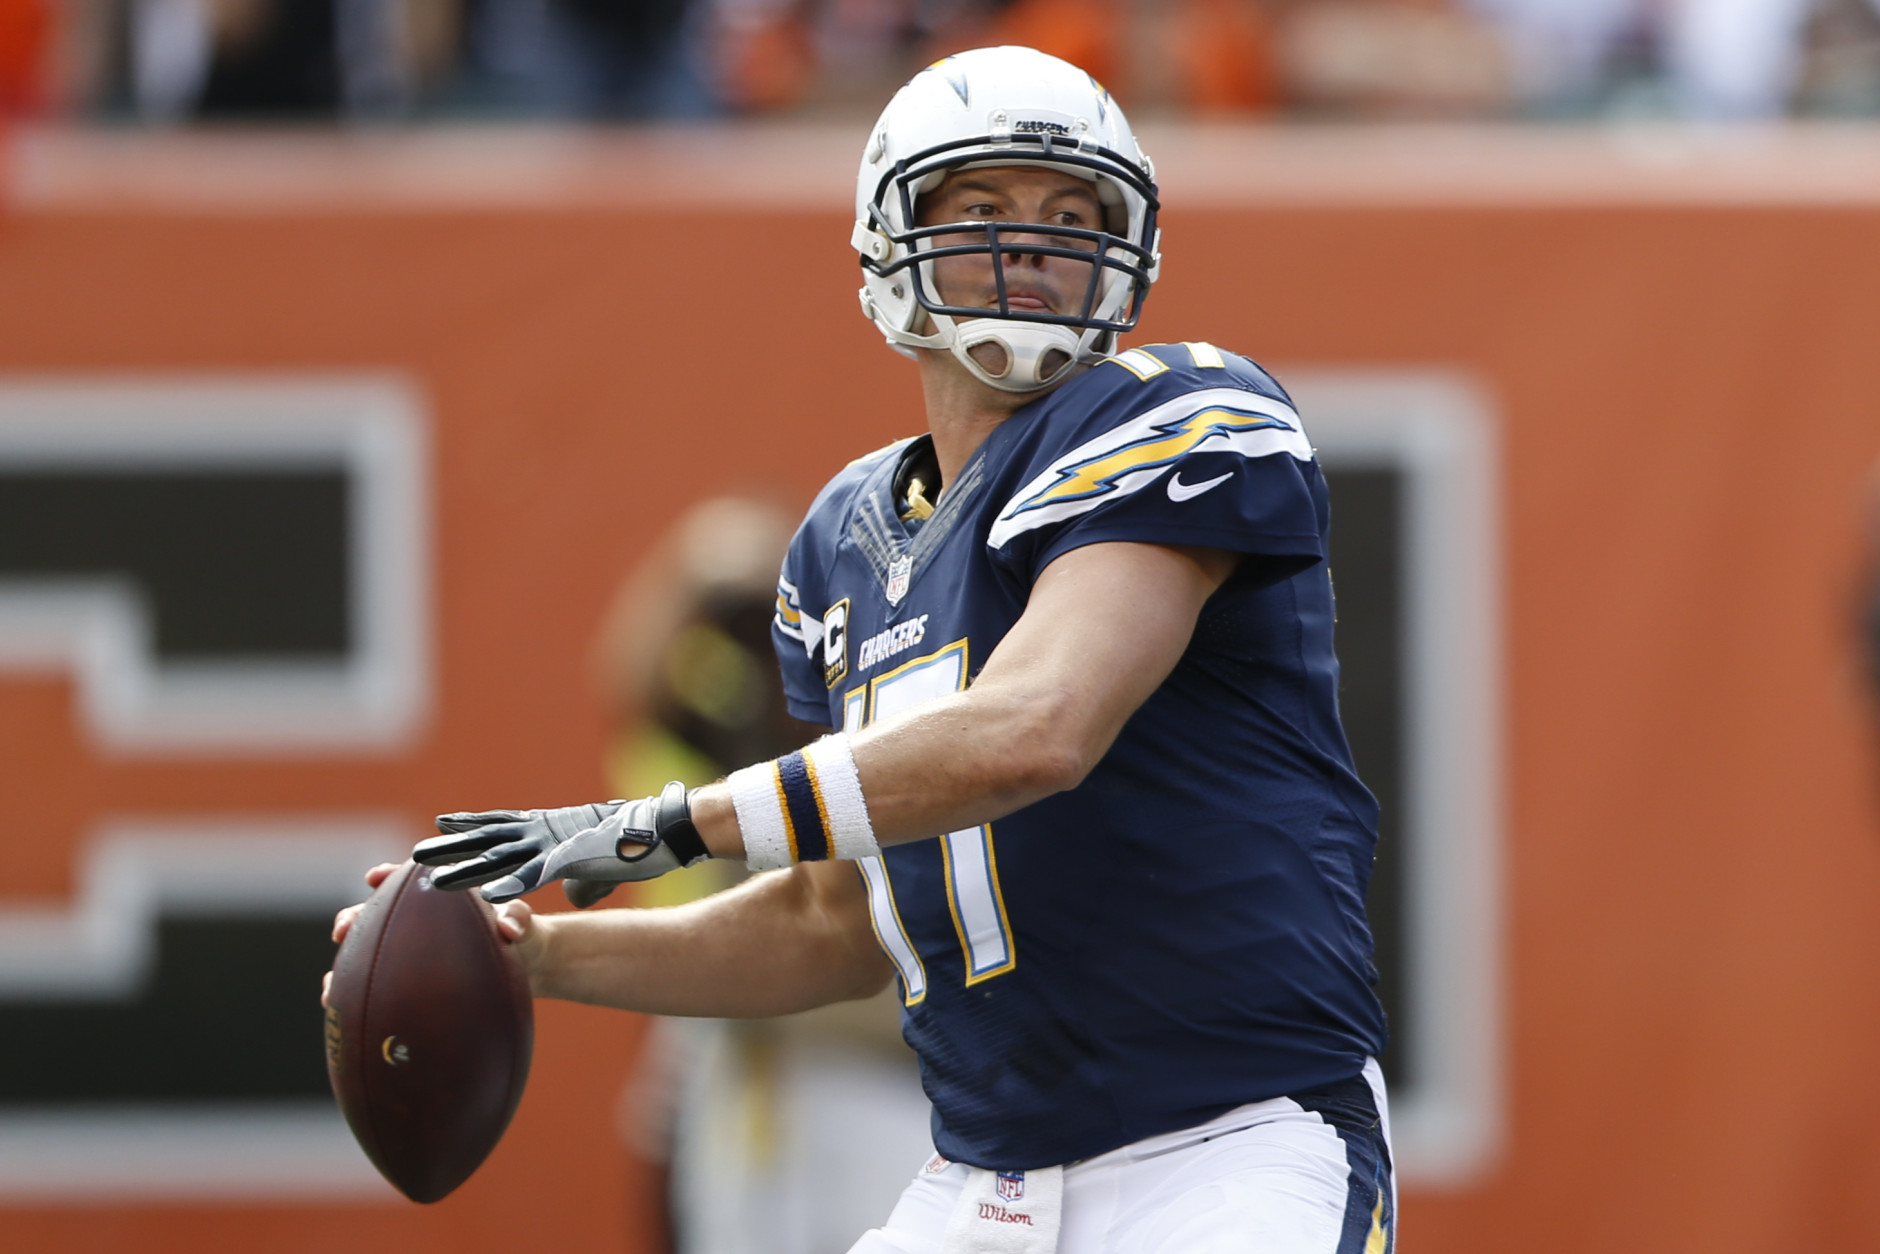 San Diego Chargers quarterback Philip Rivers (17) throws in the second half of an NFL football game against the Cincinnati Bengals, Sunday, Sept. 20, 2015, in Cincinnati. (AP Photo/Gary Landers)